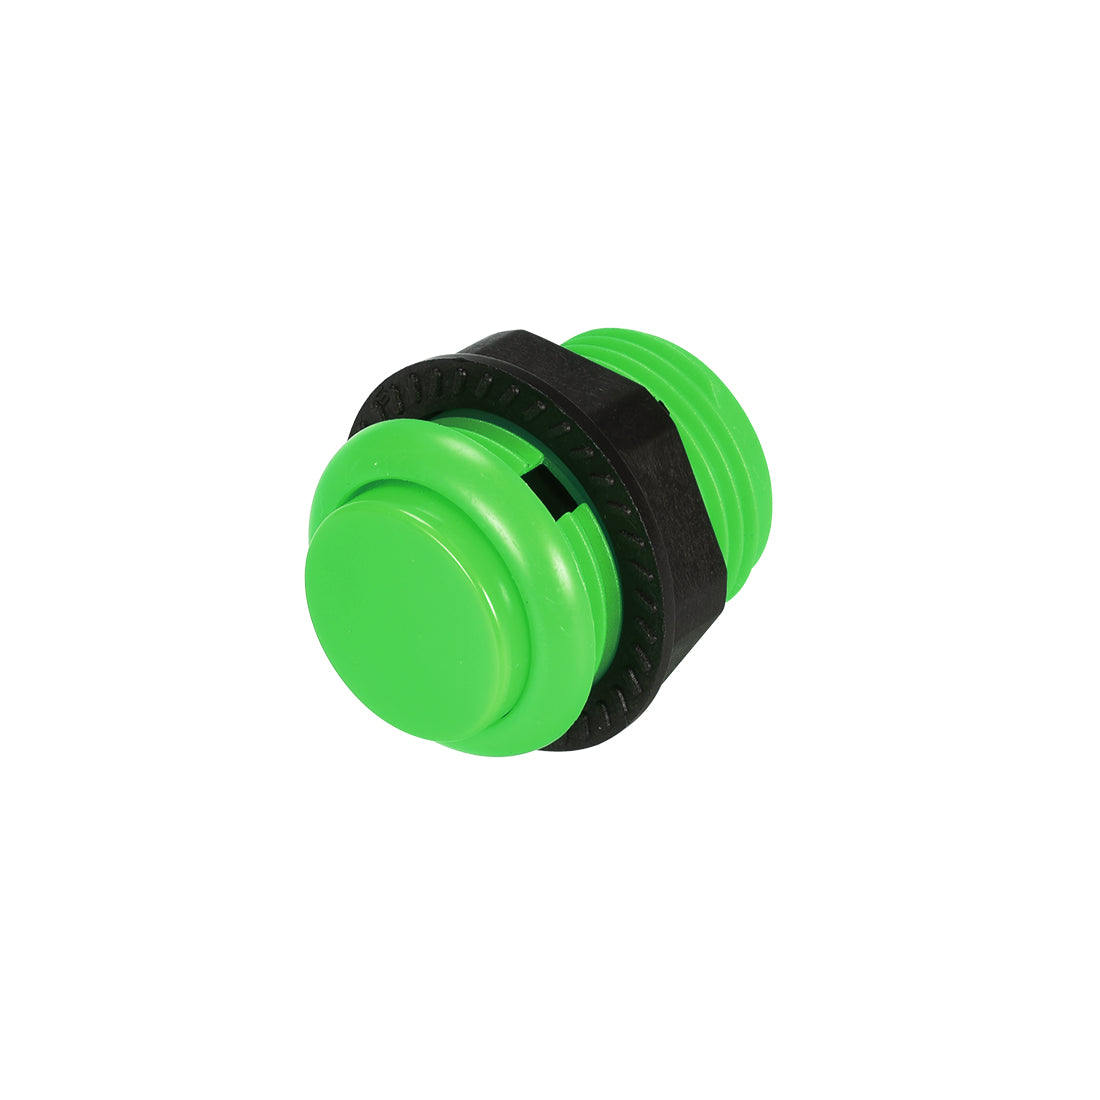 uxcell Uxcell Game Push Button Switch for Arcade Video Games